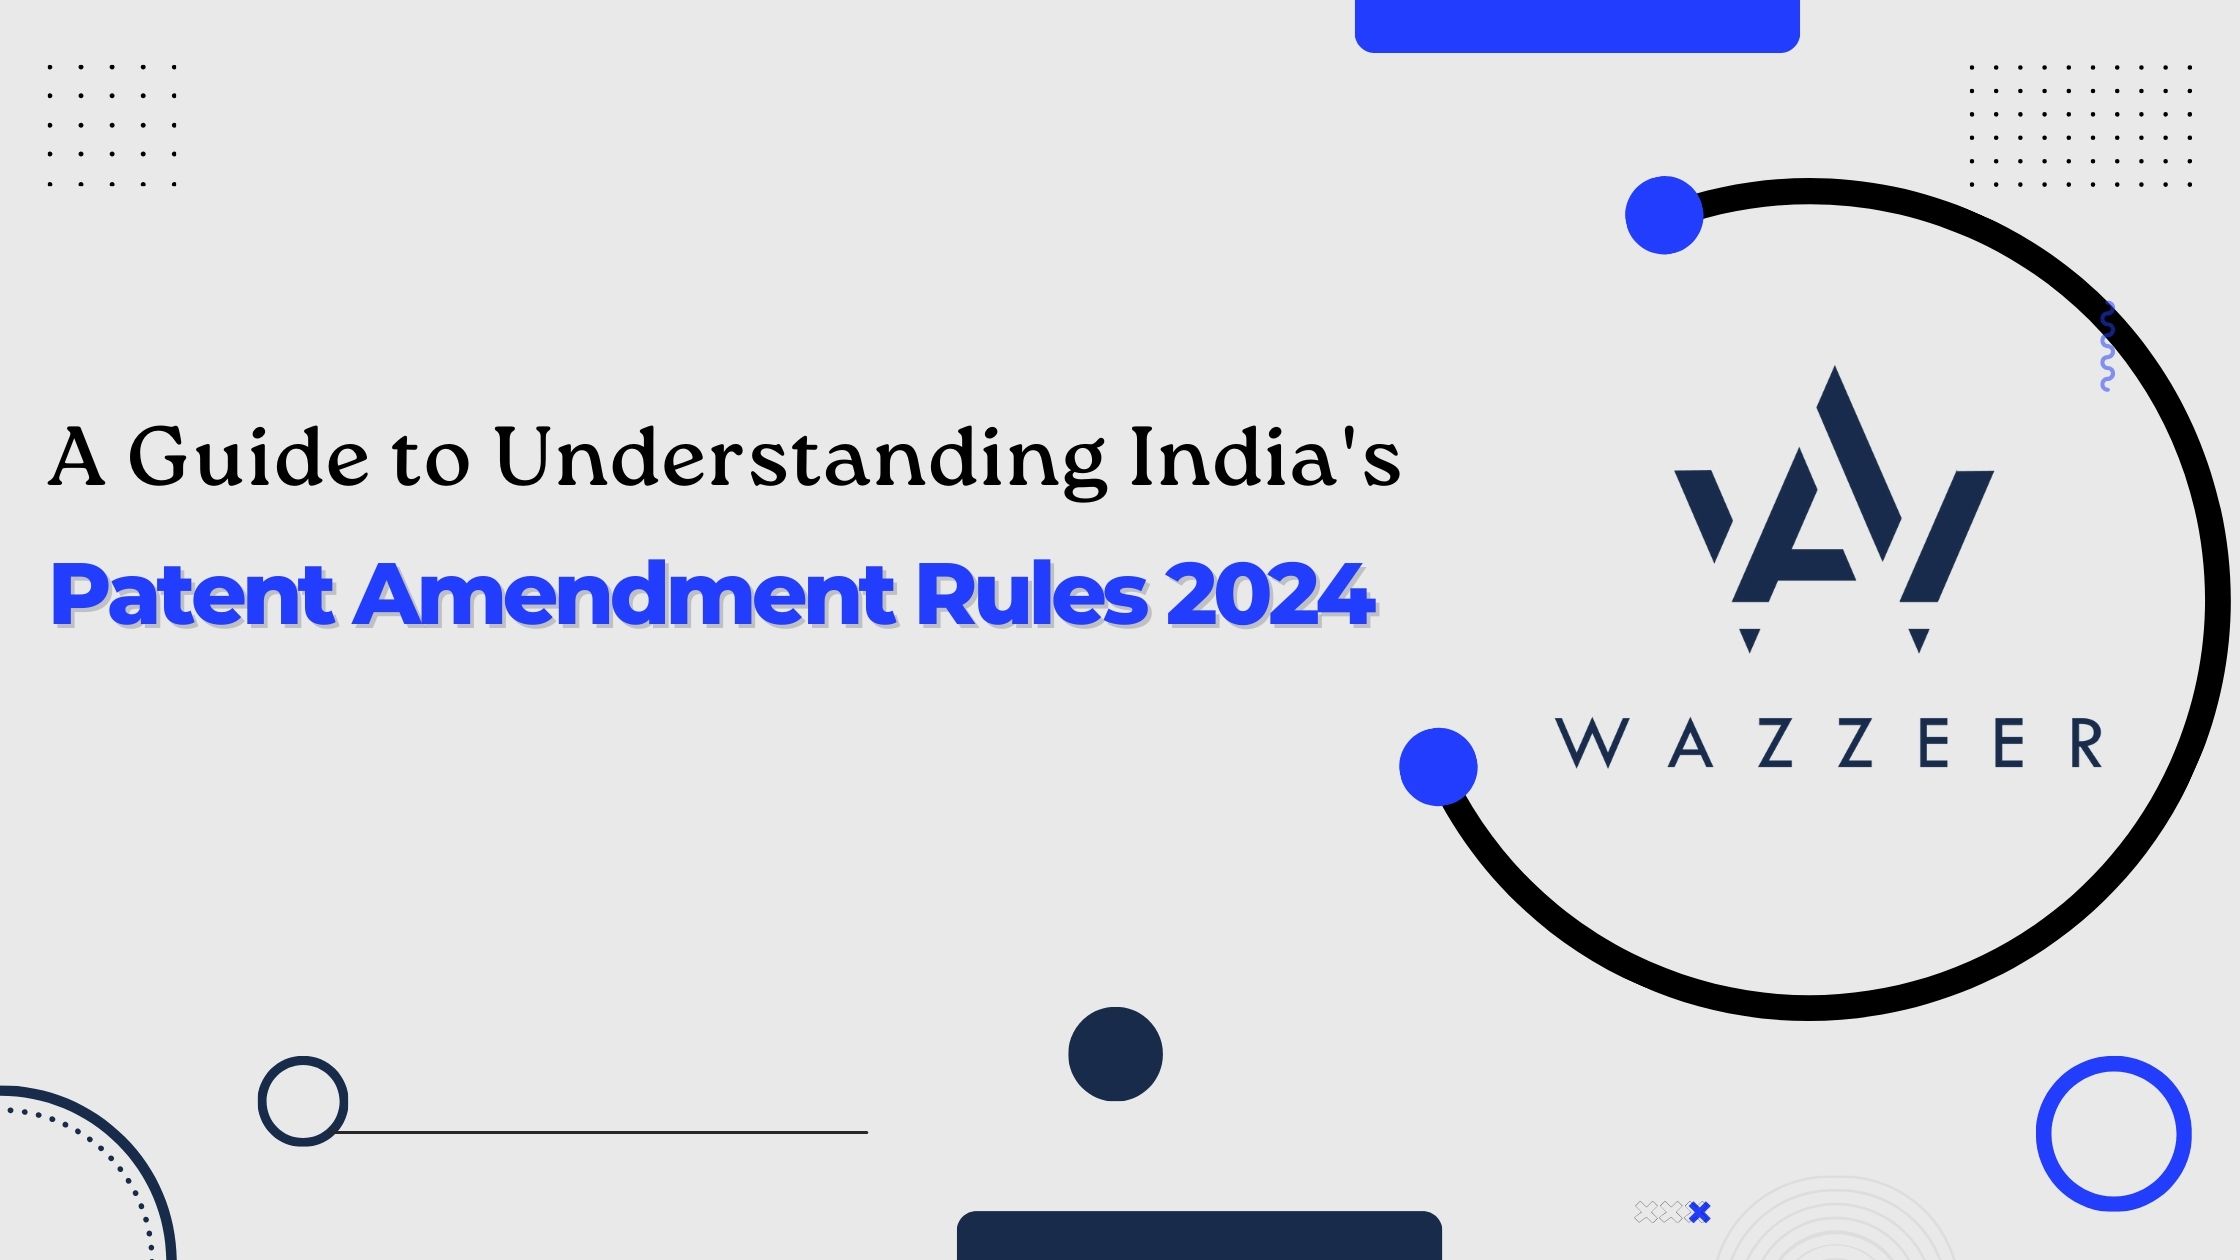 A Guide to Understanding India's Patent Amendment Rules 2024